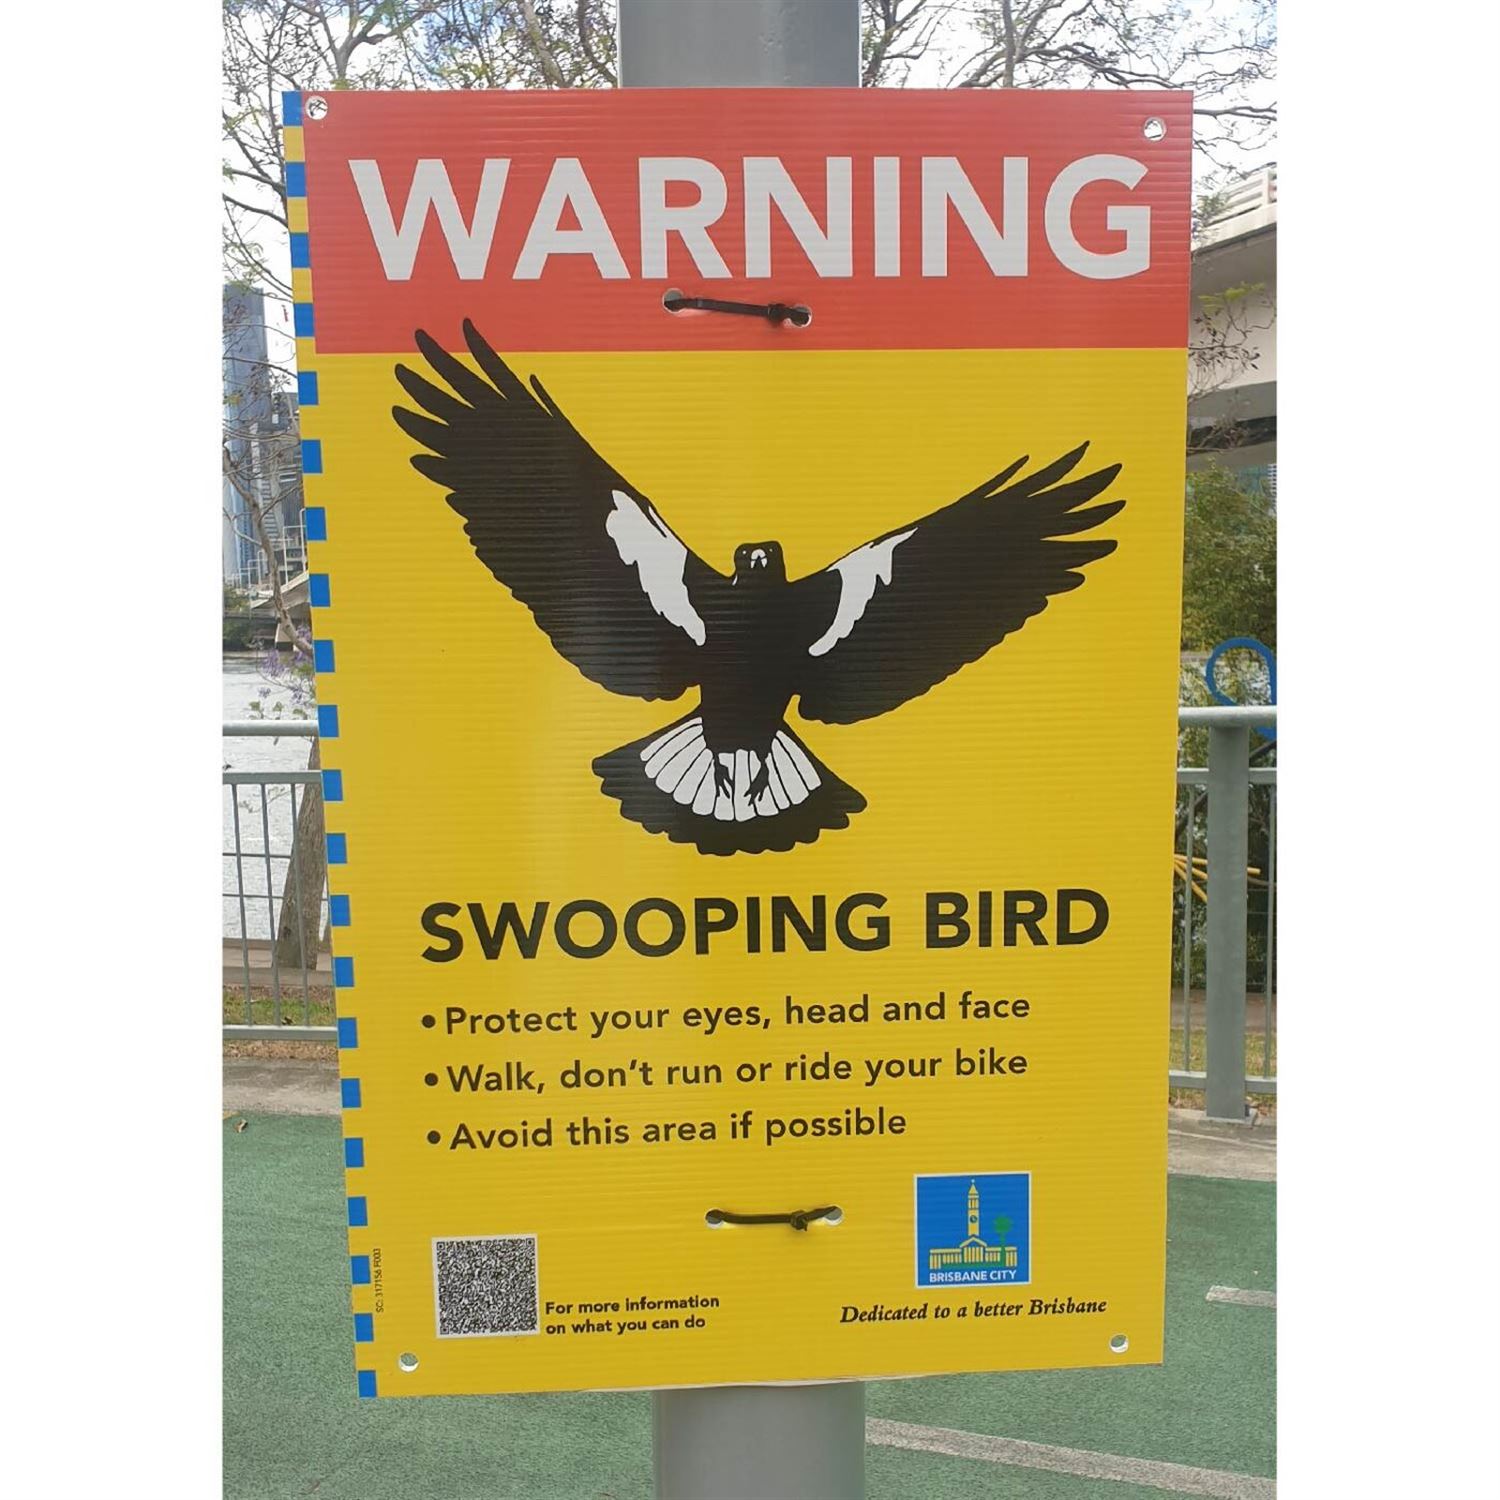 It's also swooping season